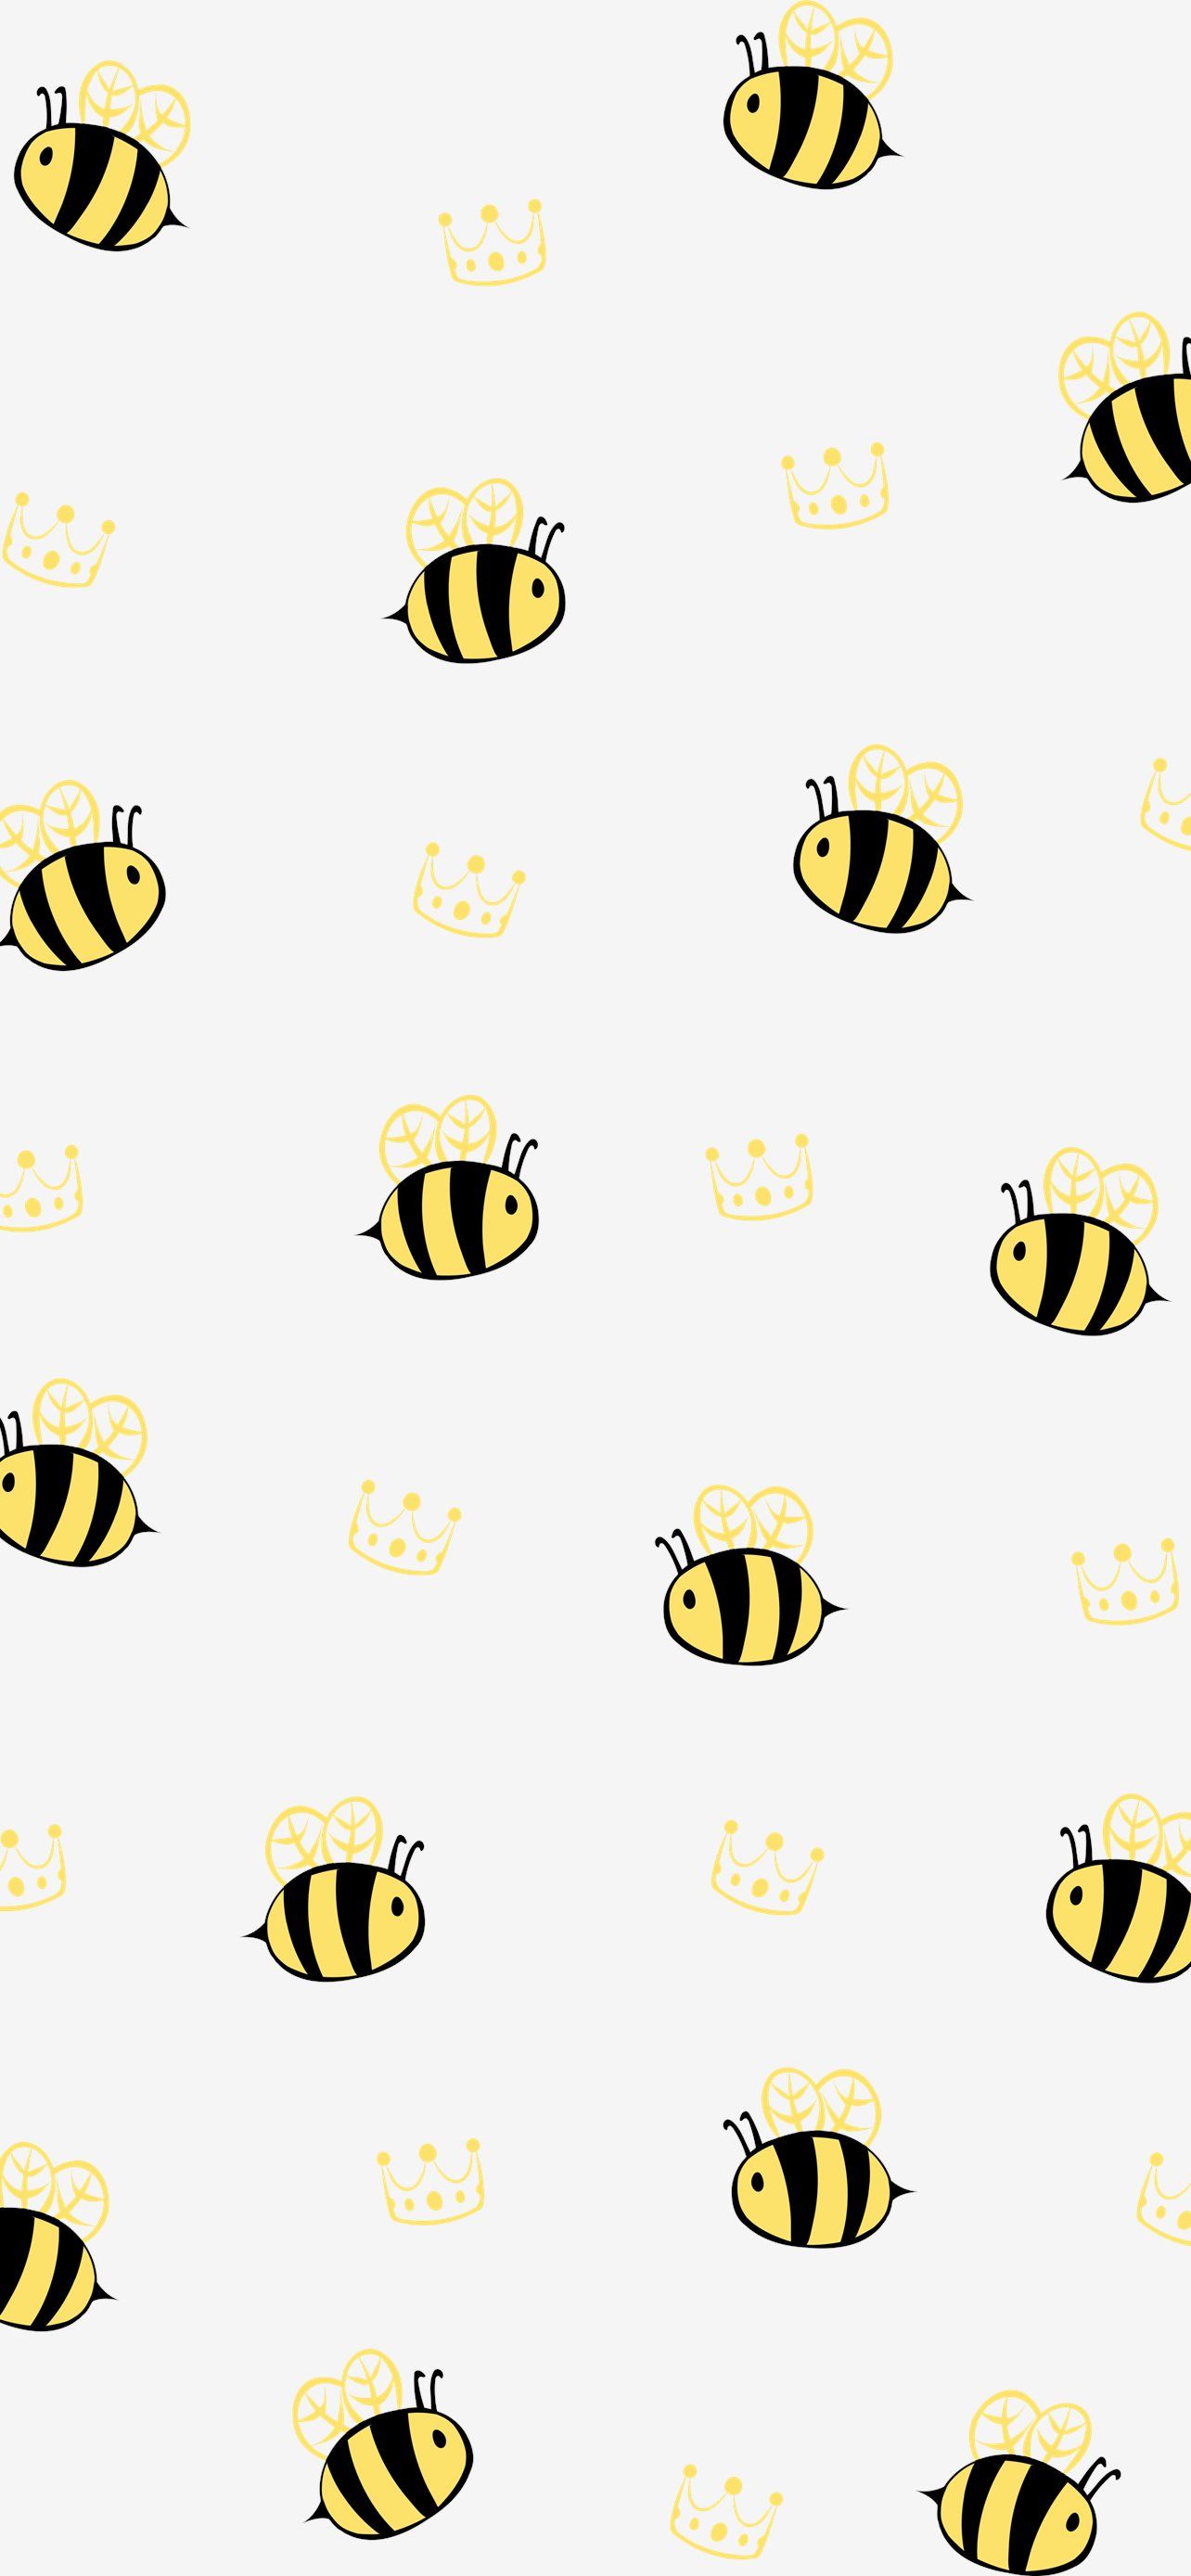 A wallpaper with bees and crowns - Bee, honey, kawaii